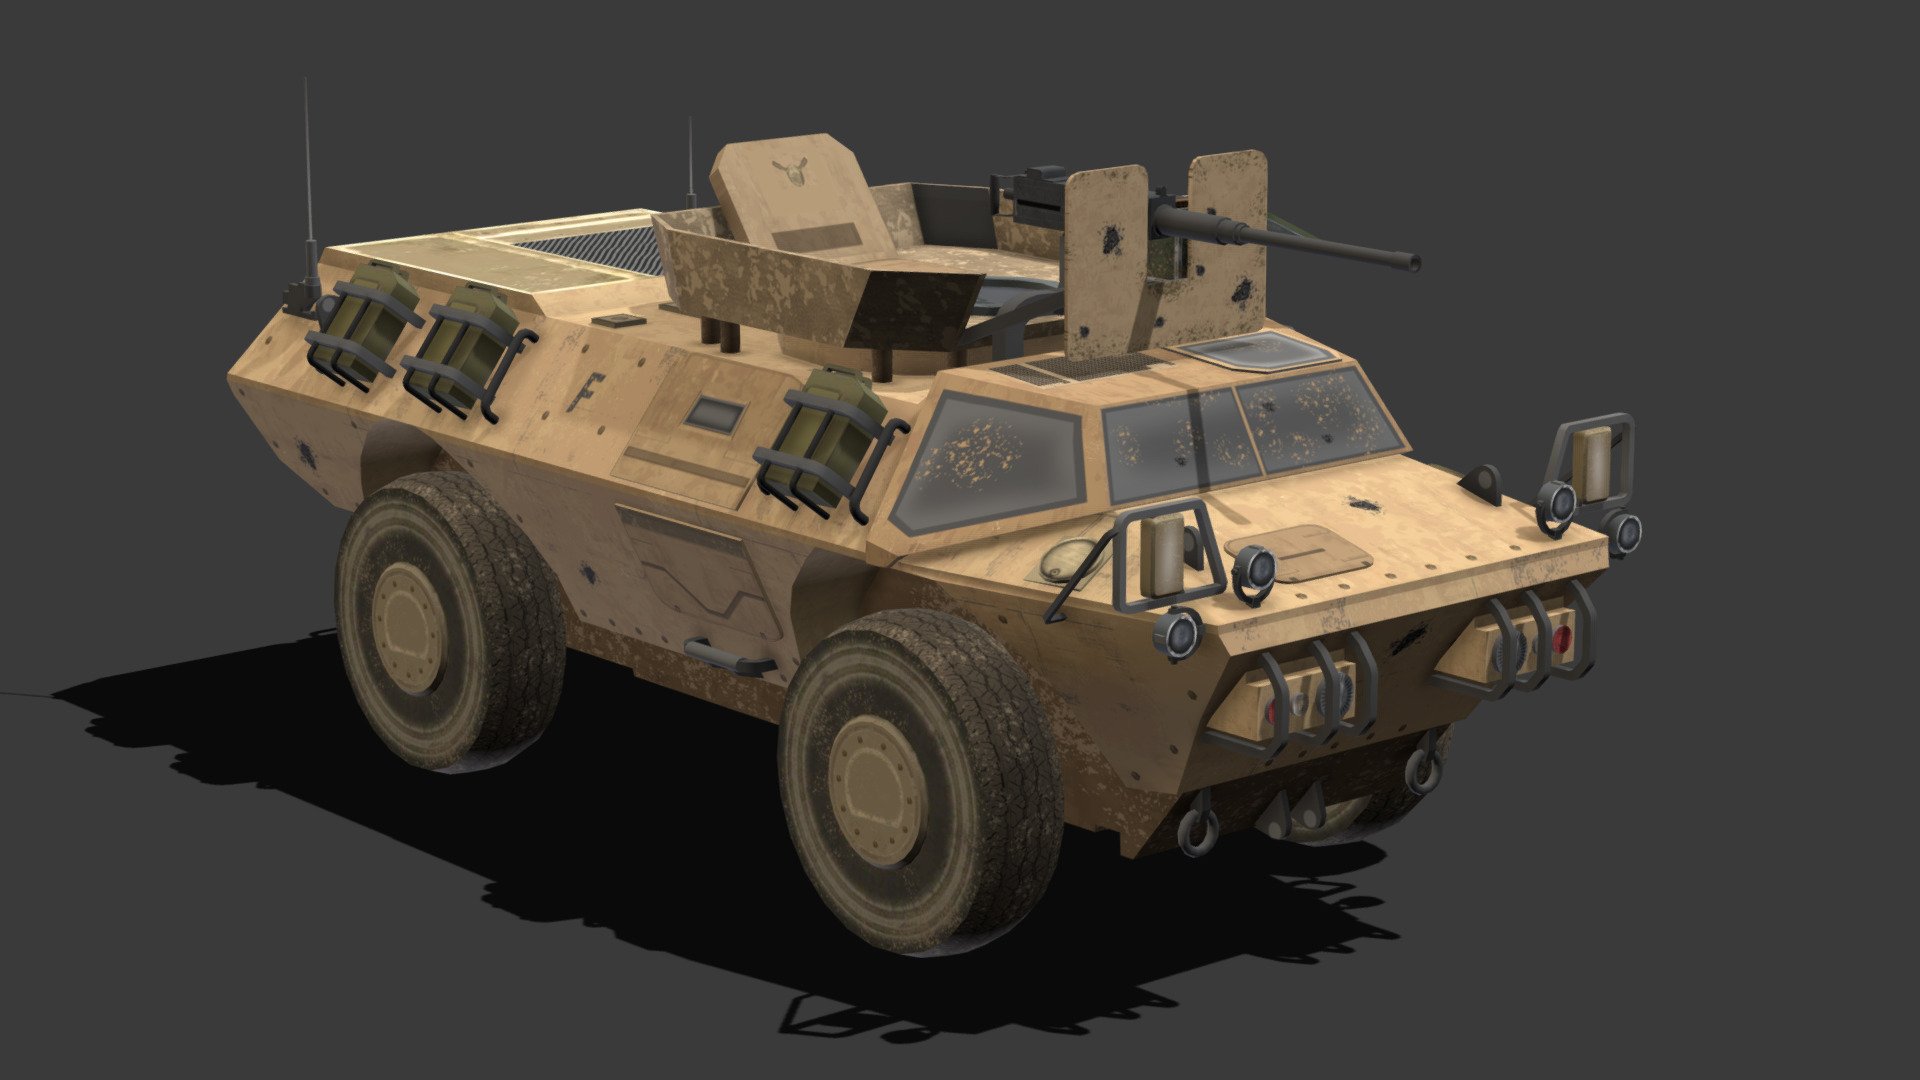 Tank Low-Poly # 4

You can use these models in any game and project.

This model is made with order and precision.

Separated parts (body. wheels. gun).

Very low poly

Average poly count: 15,000 tris.

Texture size: 4096/4096 (BMP).

Number of textures: 1.

Number of materials: 1.

Format: fbx.obj.max.mtl 3d model